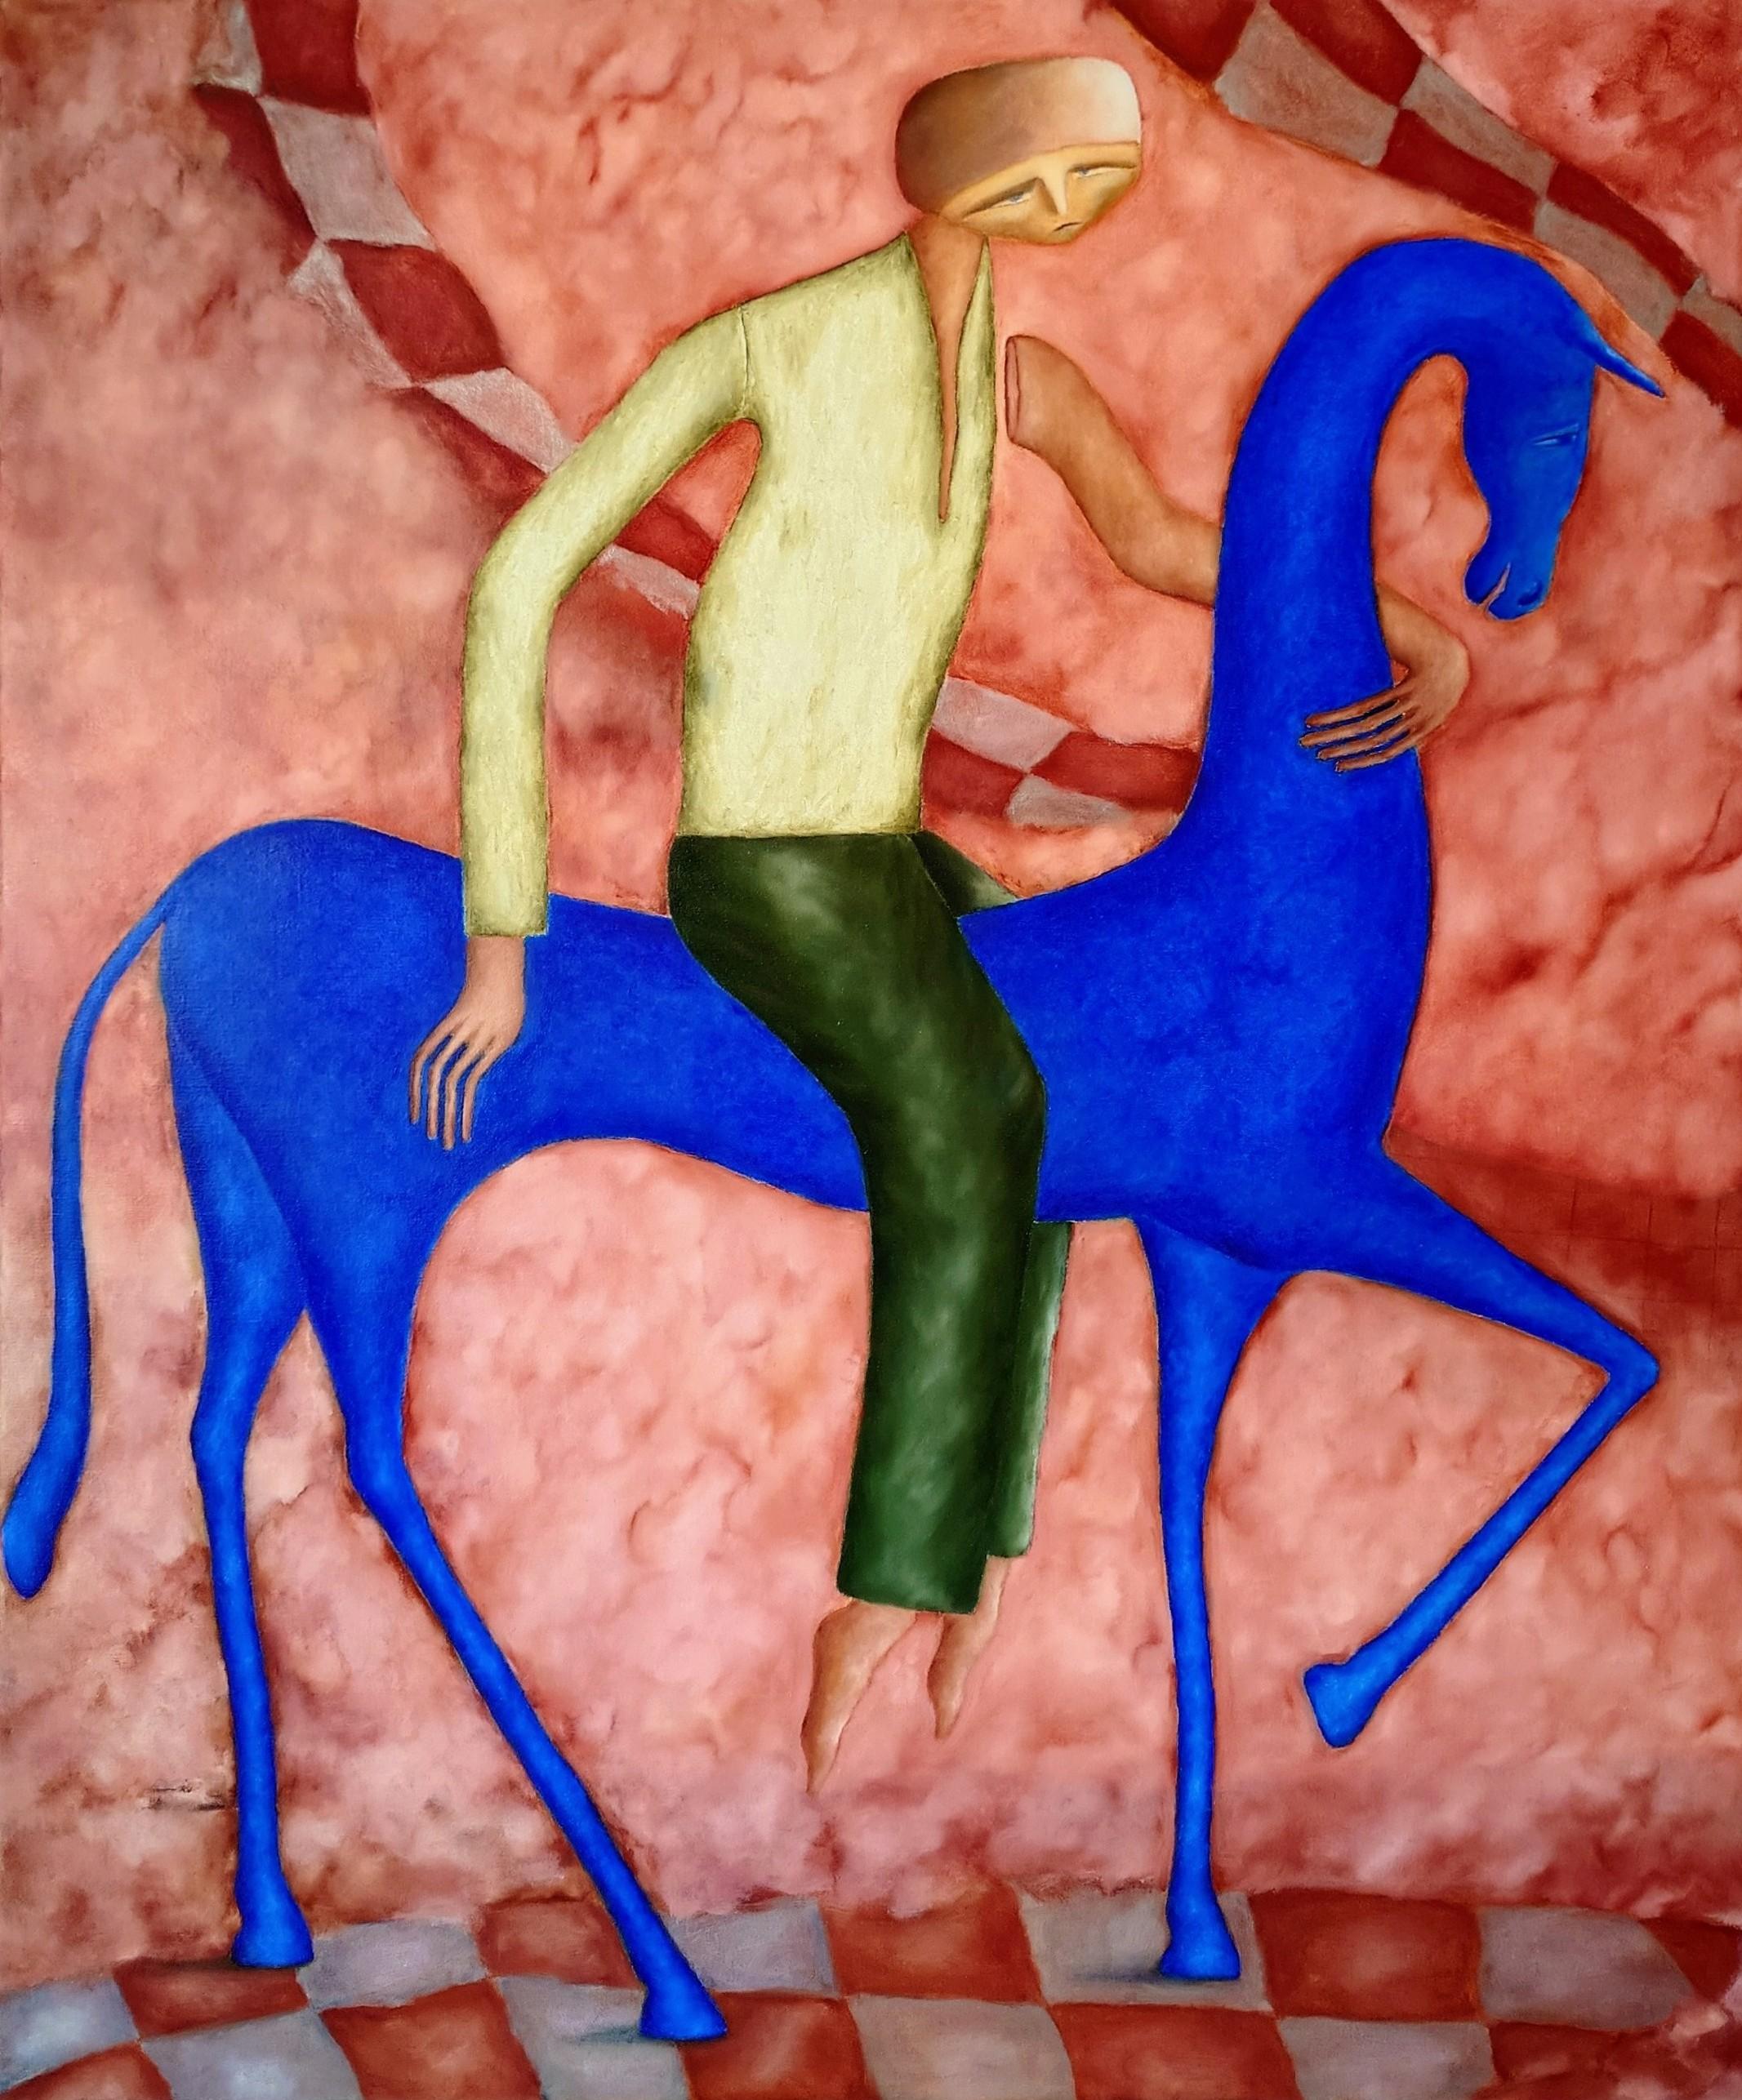 Traveller On A horse - Oil on Canvas Figurative Painting